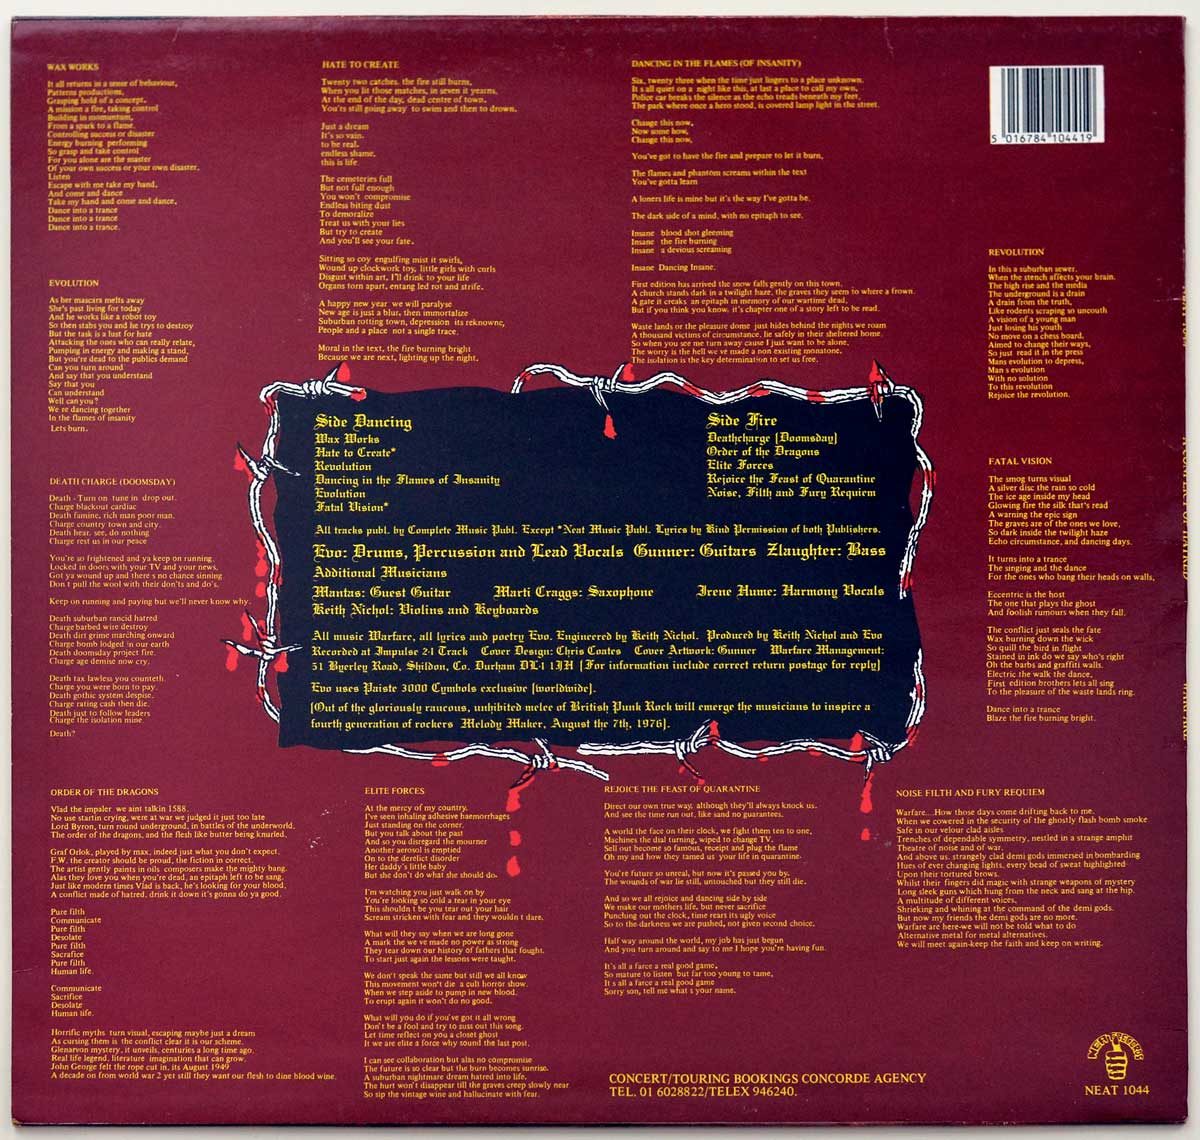 Photo of album back cover WARFARE - A Conflict of Hatred 